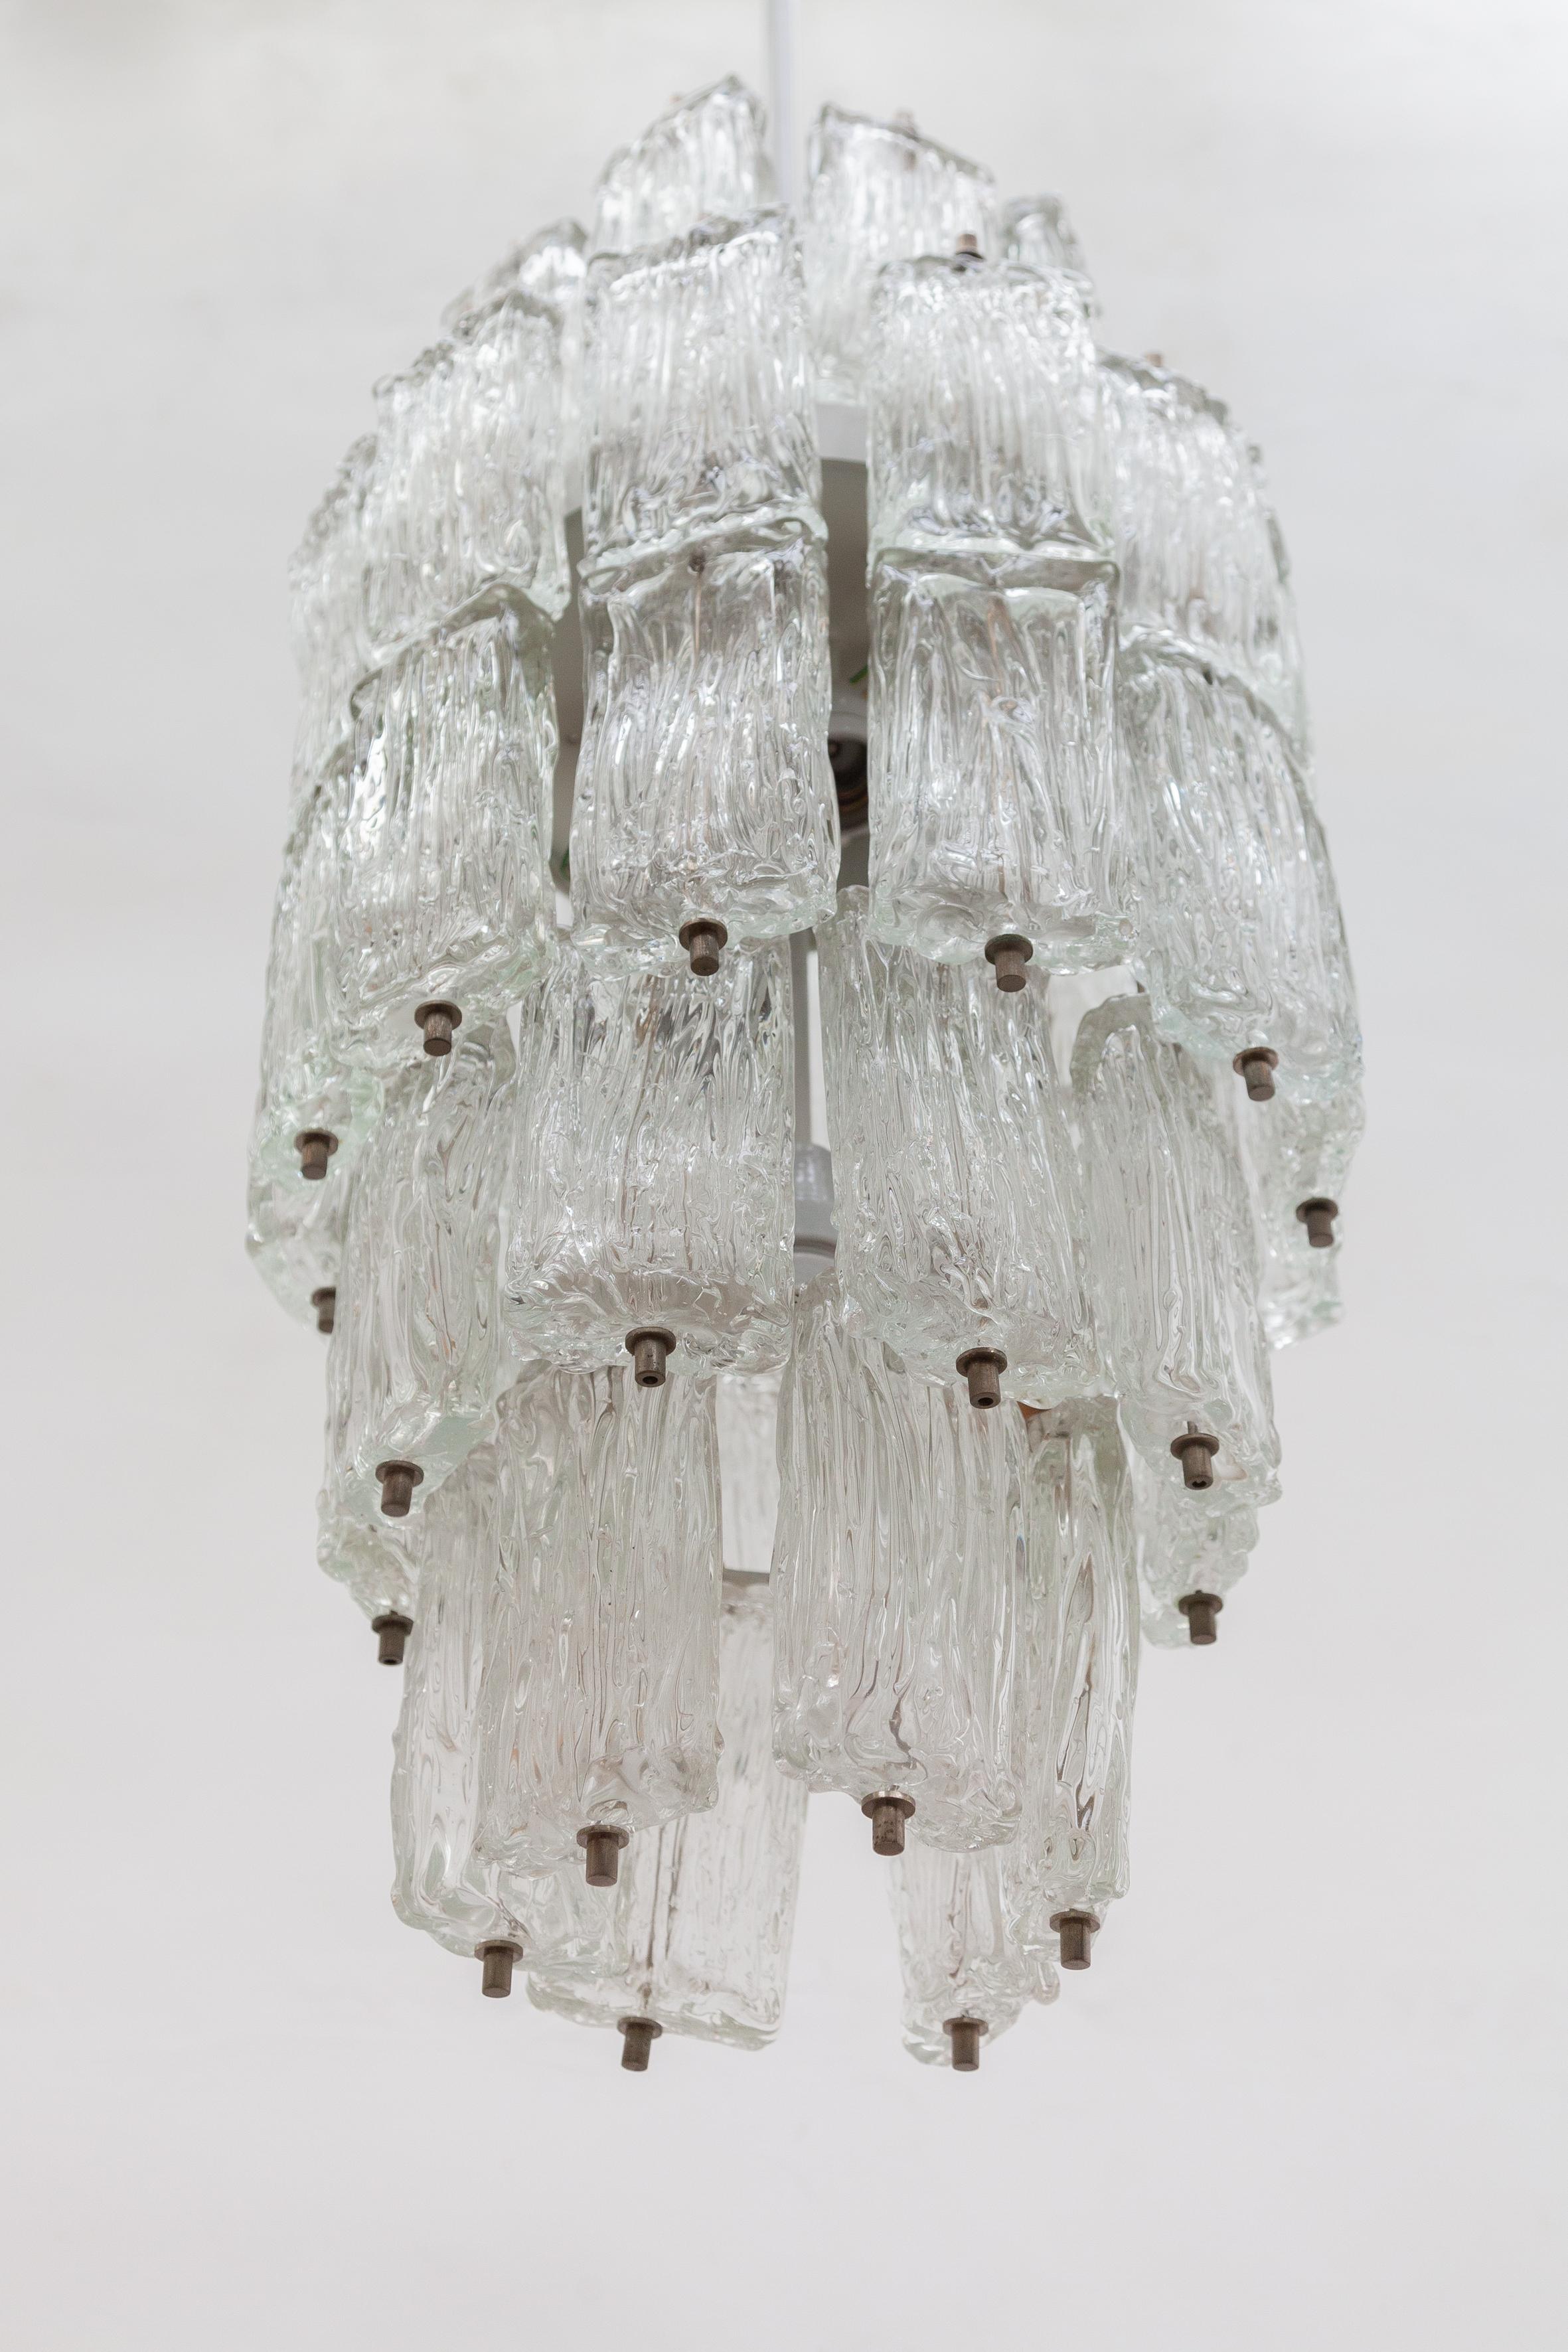 Molded Venini Large Chandelier Iced Textured Clear Glass Five Tiers 1960s Murano, Italy